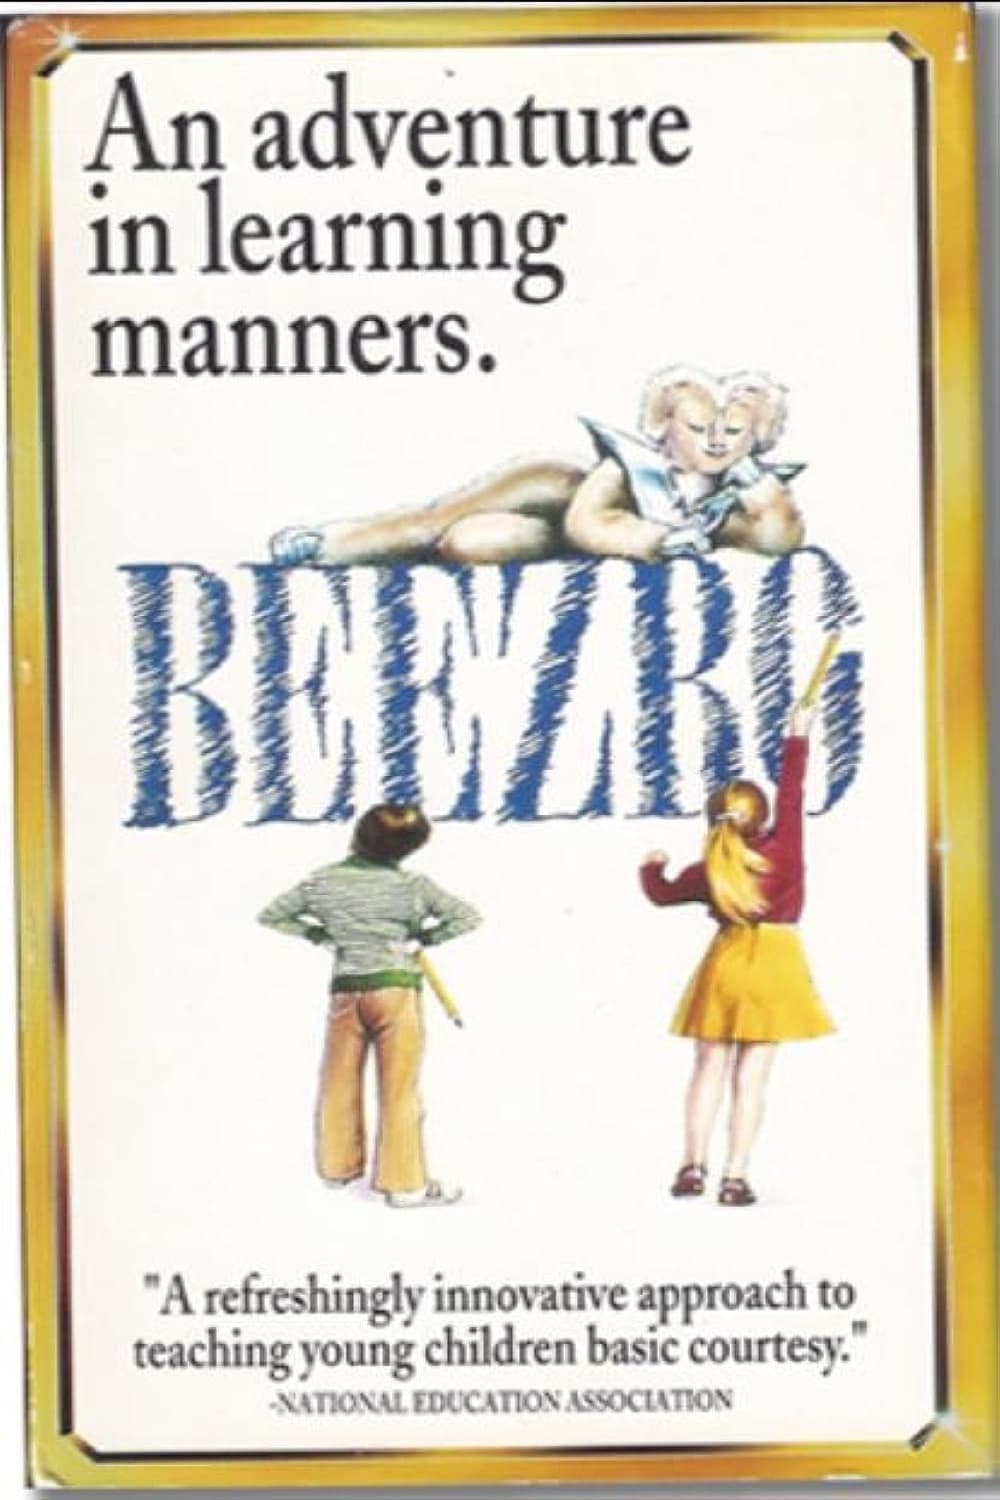 Beezbo's Adventures: How to Behave Like a Human Being